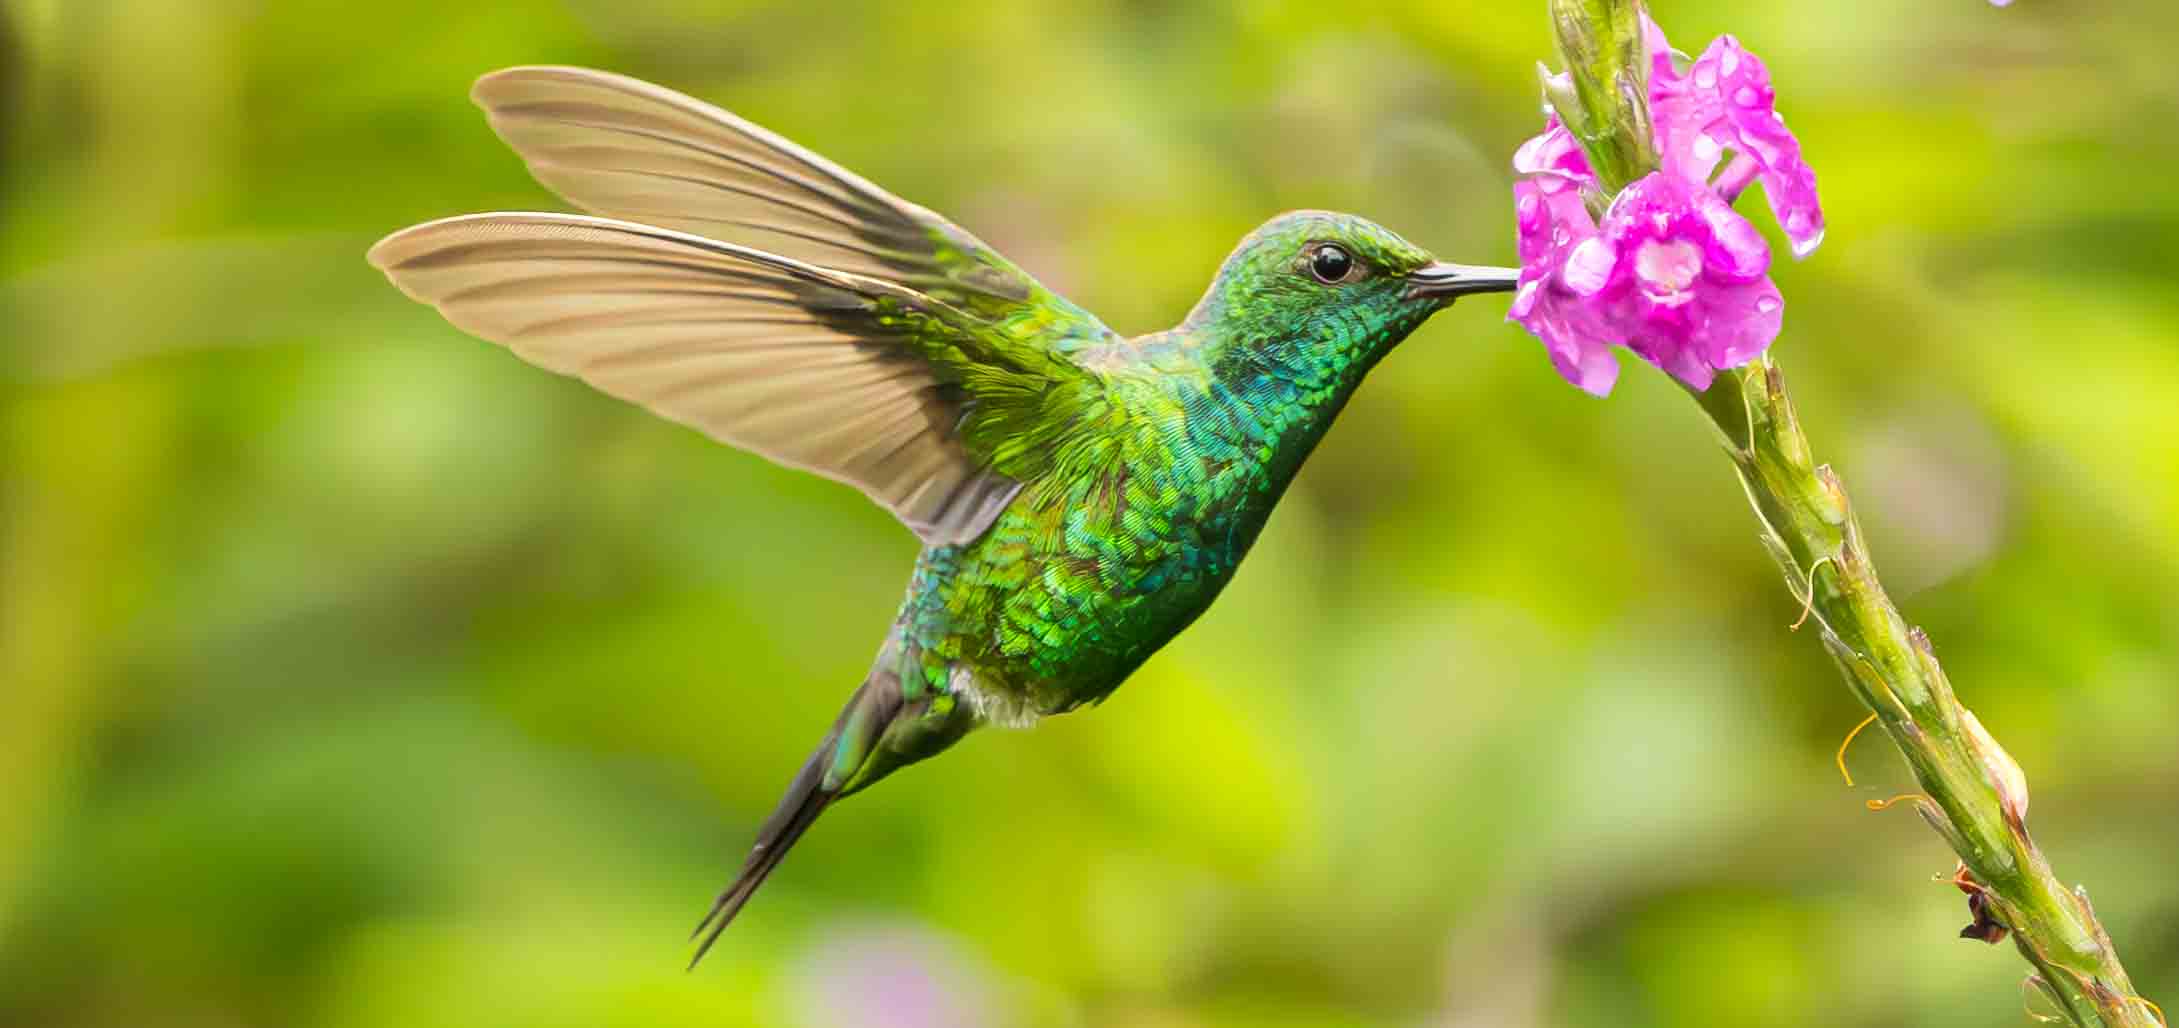 Costa Rica’s hummingbirds: You find them everywhere you look